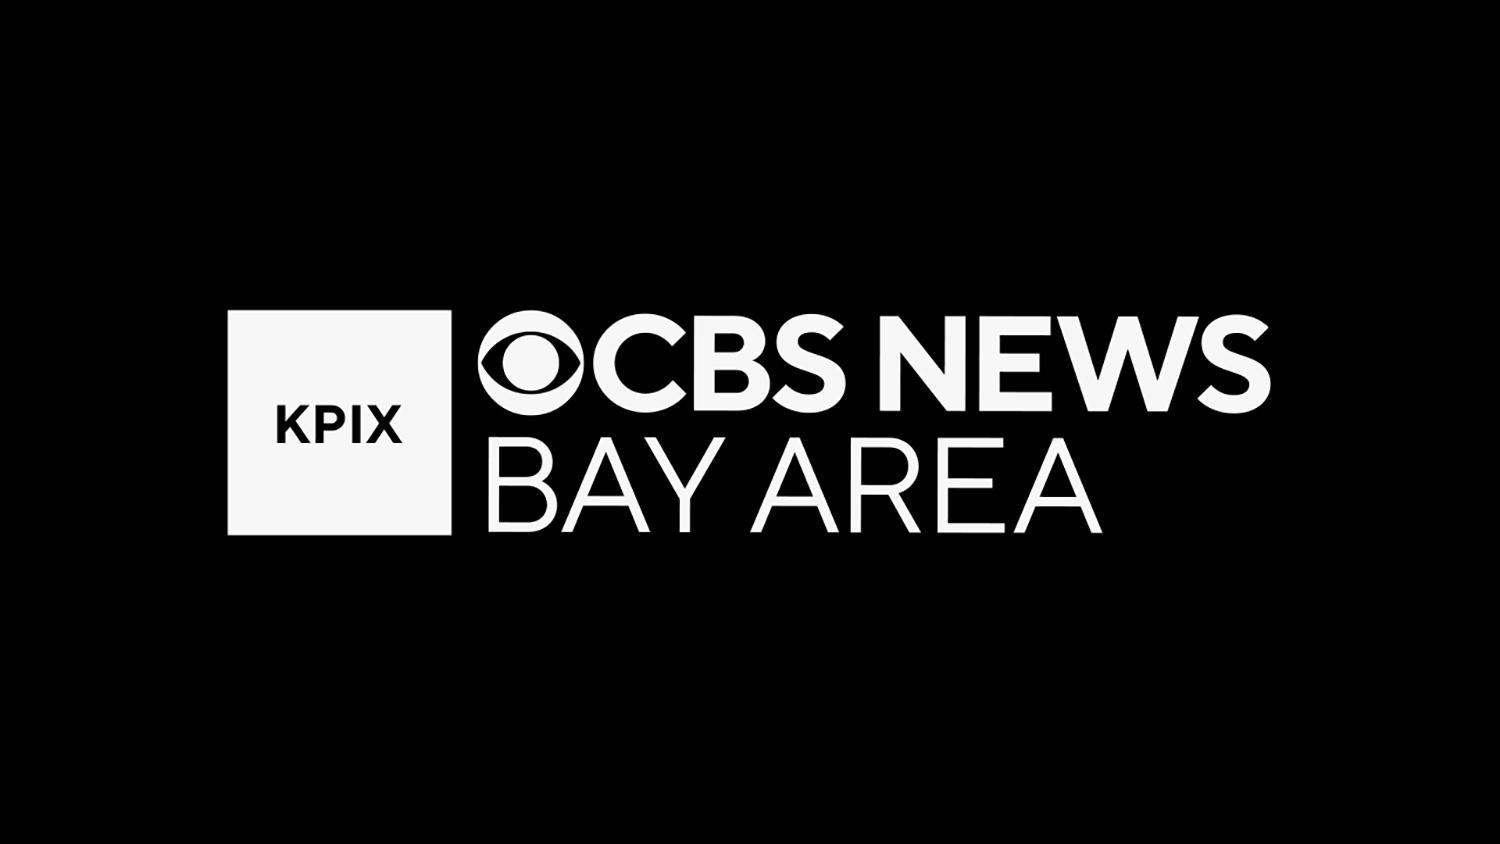 Westfield Valley Fair Mall news - Today's latest updates - CBS San Francisco